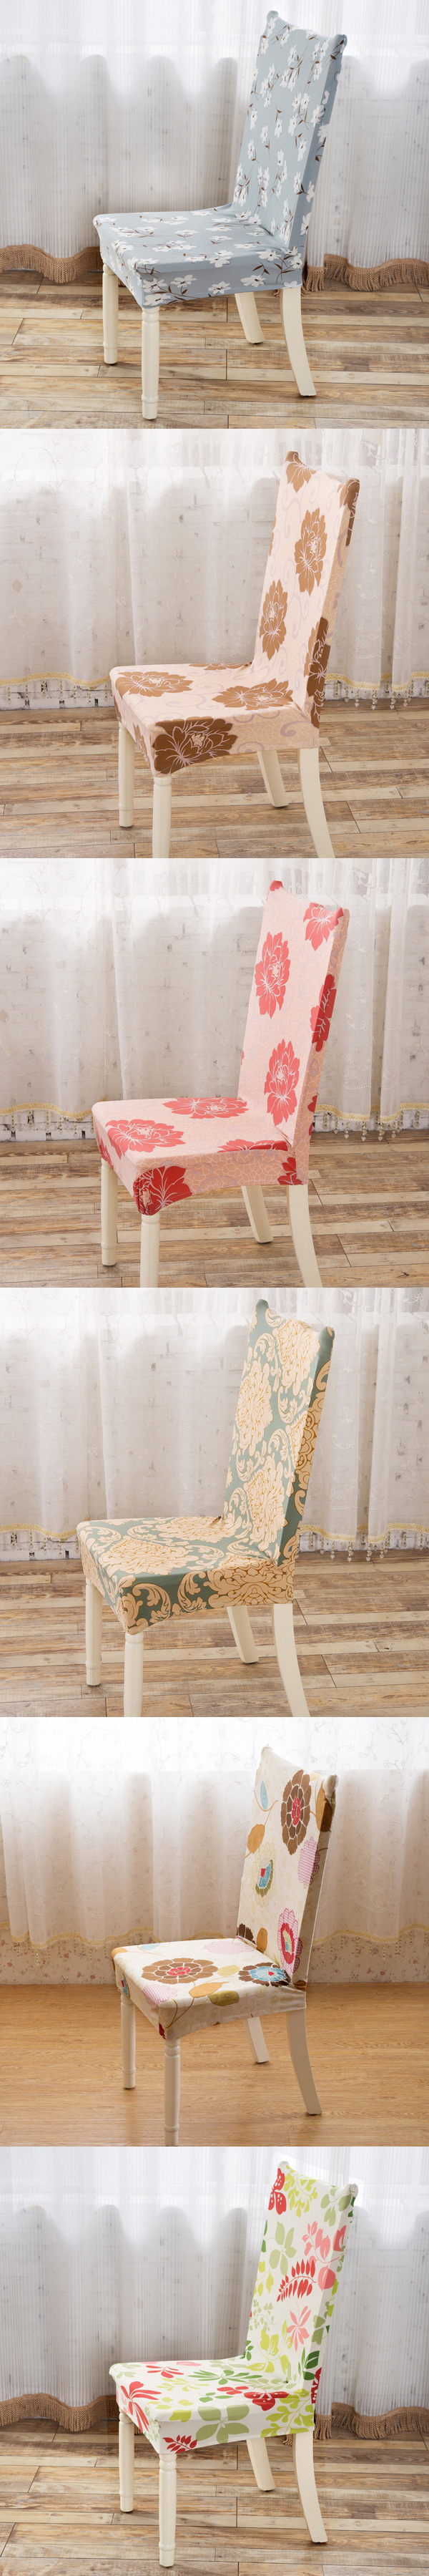 Honana-WX-916-Banquet-Elastic-Stretch-Spandex-Chair-Seat-Cover-Party-Dining-Room-Wedding-Restaurant--1088203-3